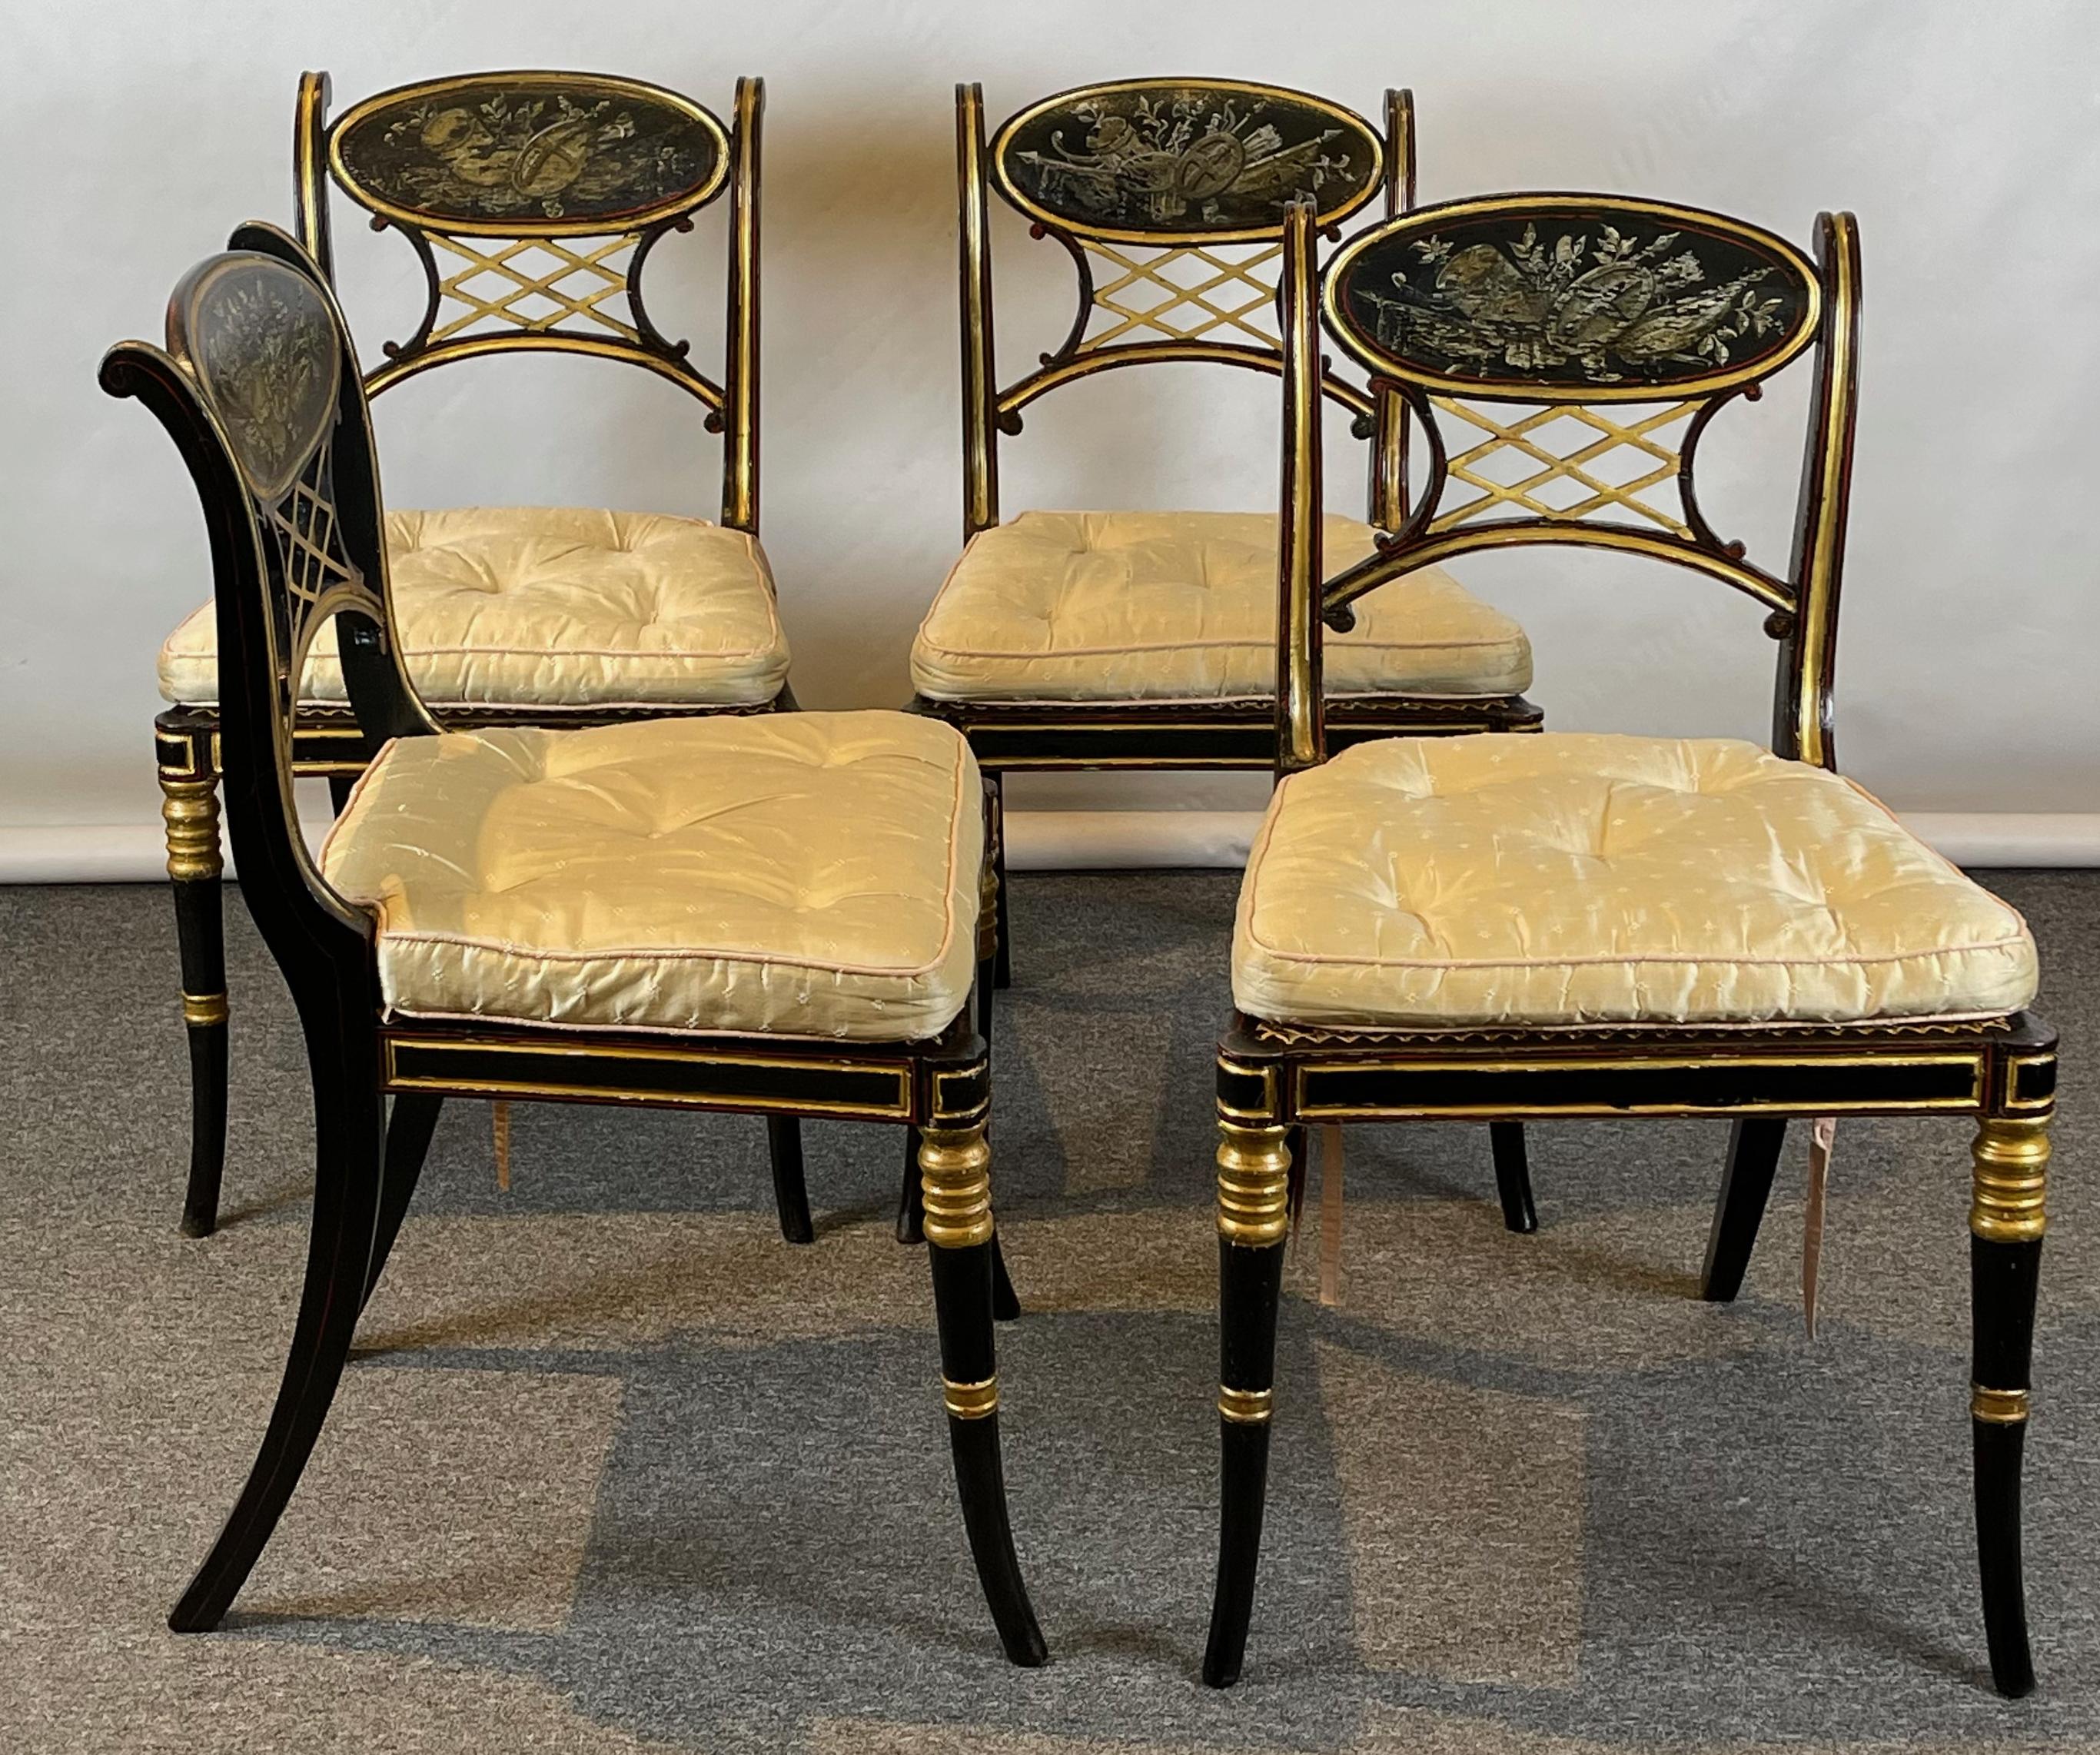 Set of Four Early 19th Century Regency Dining Chairs 1